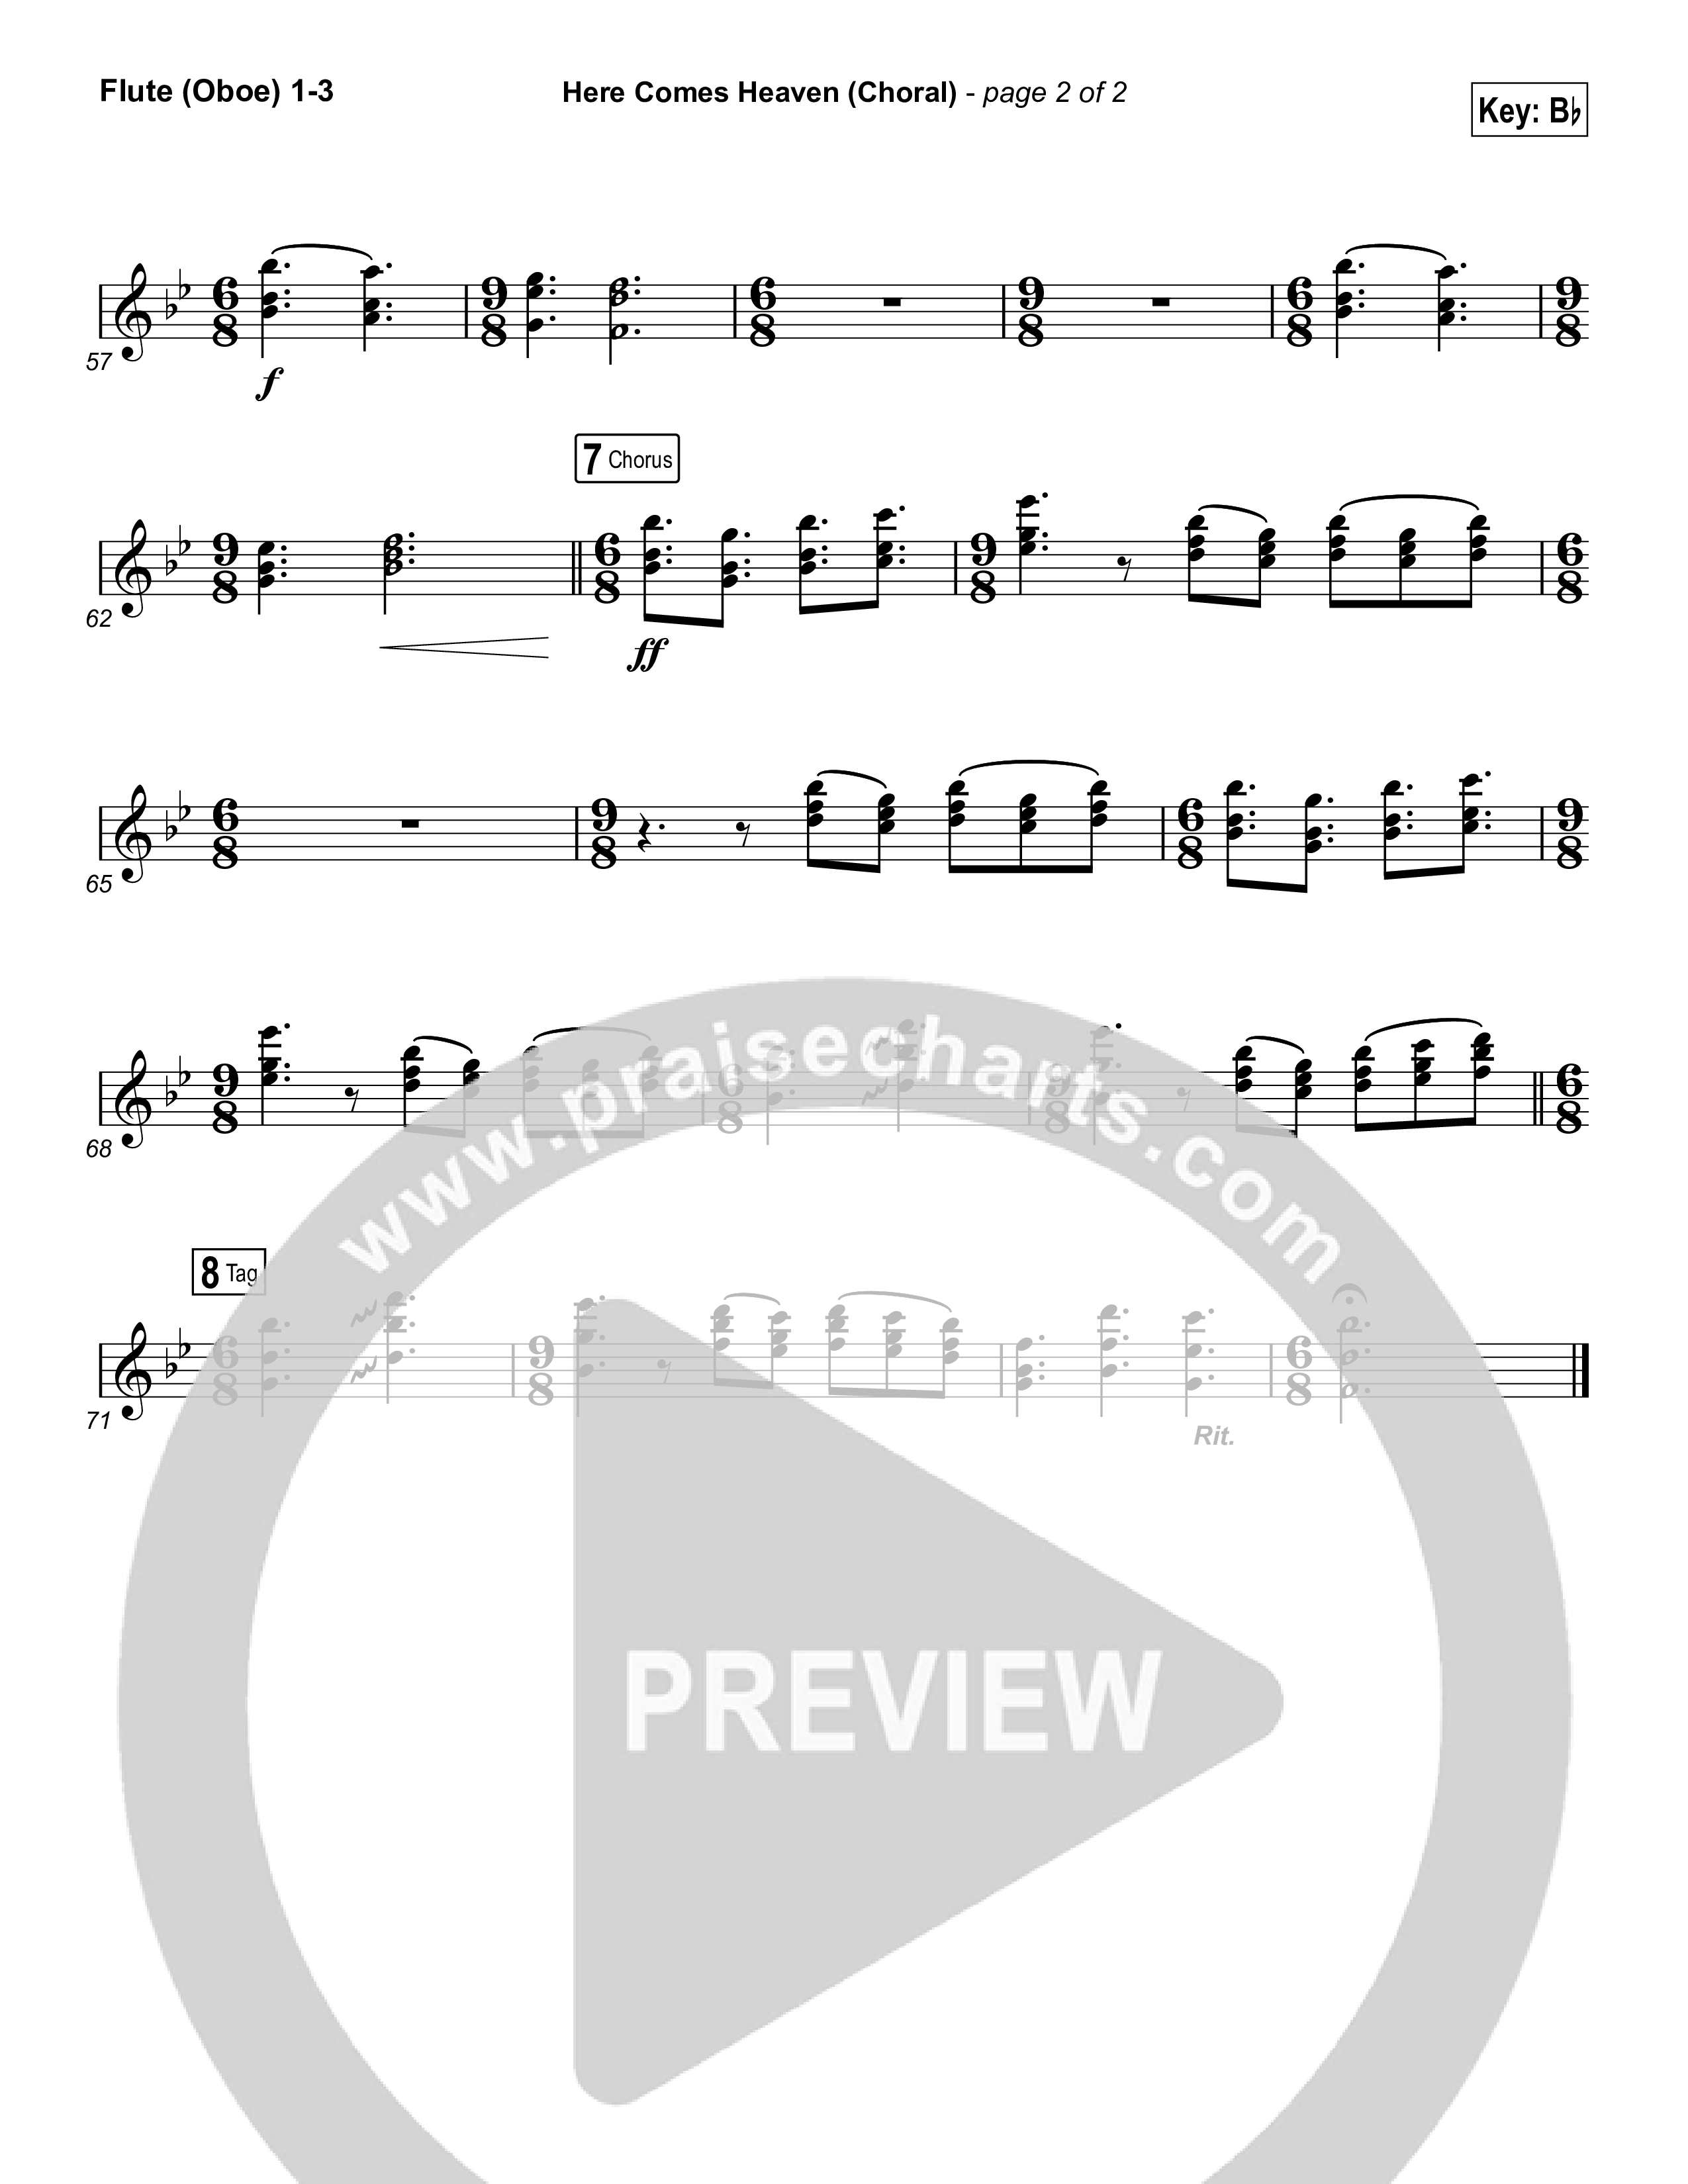 Here Comes Heaven (Choral Anthem SATB) Flute/Oboe 1/2/3 (Elevation Worship / Arr. Luke Gambill)